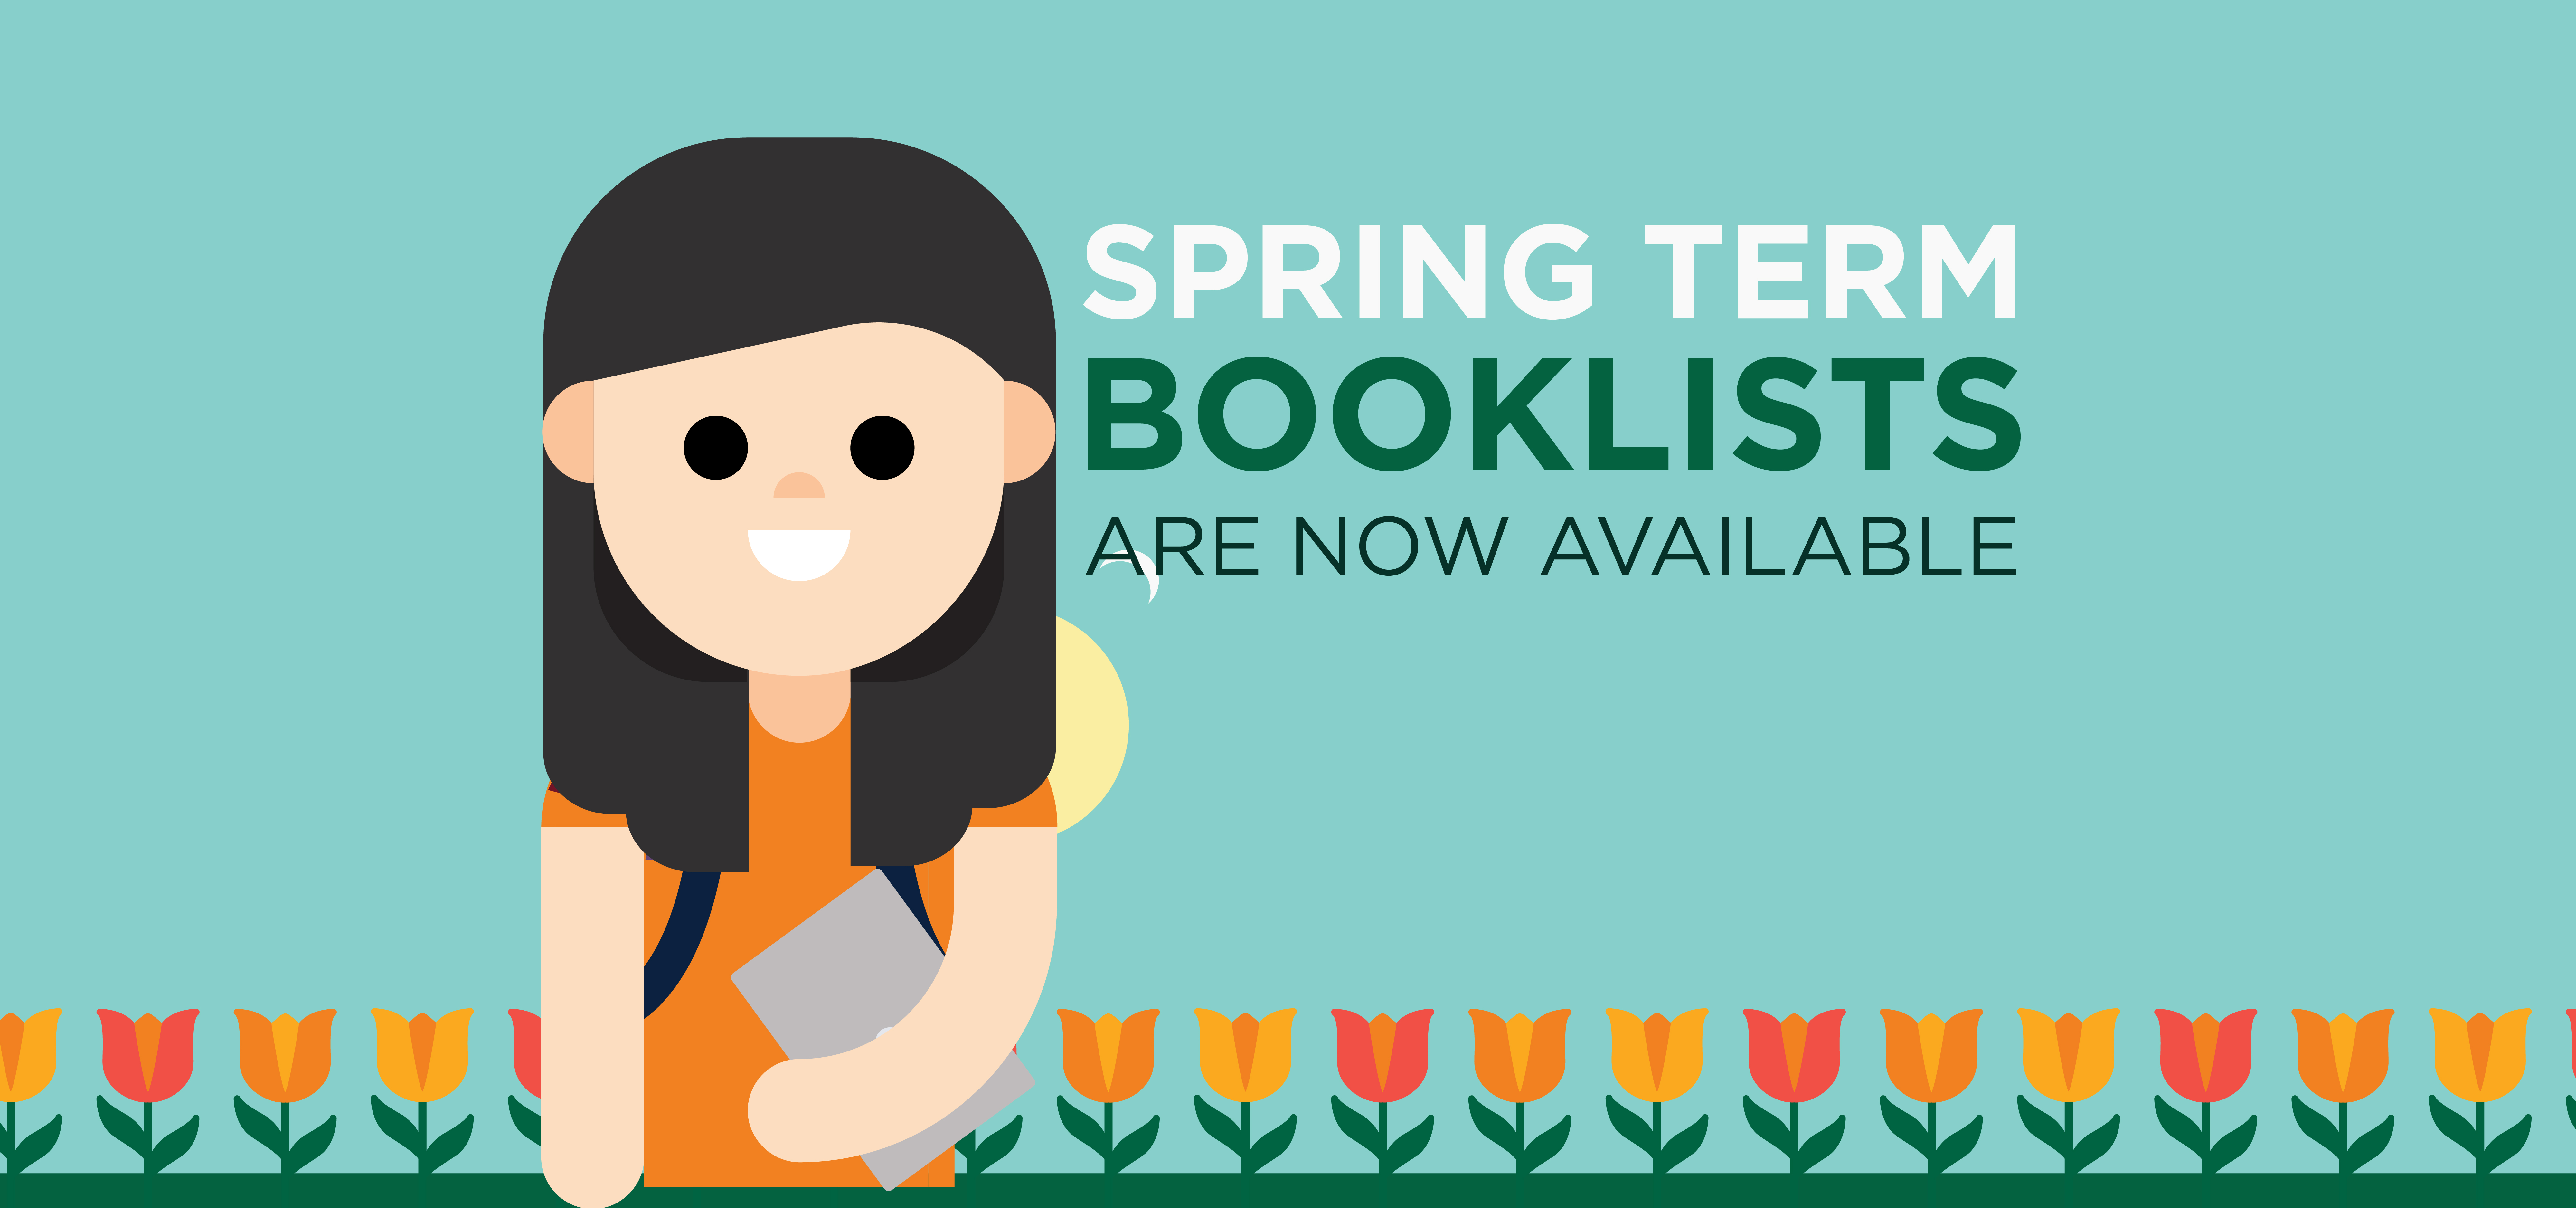 Spring Term Booklists Available April 10.